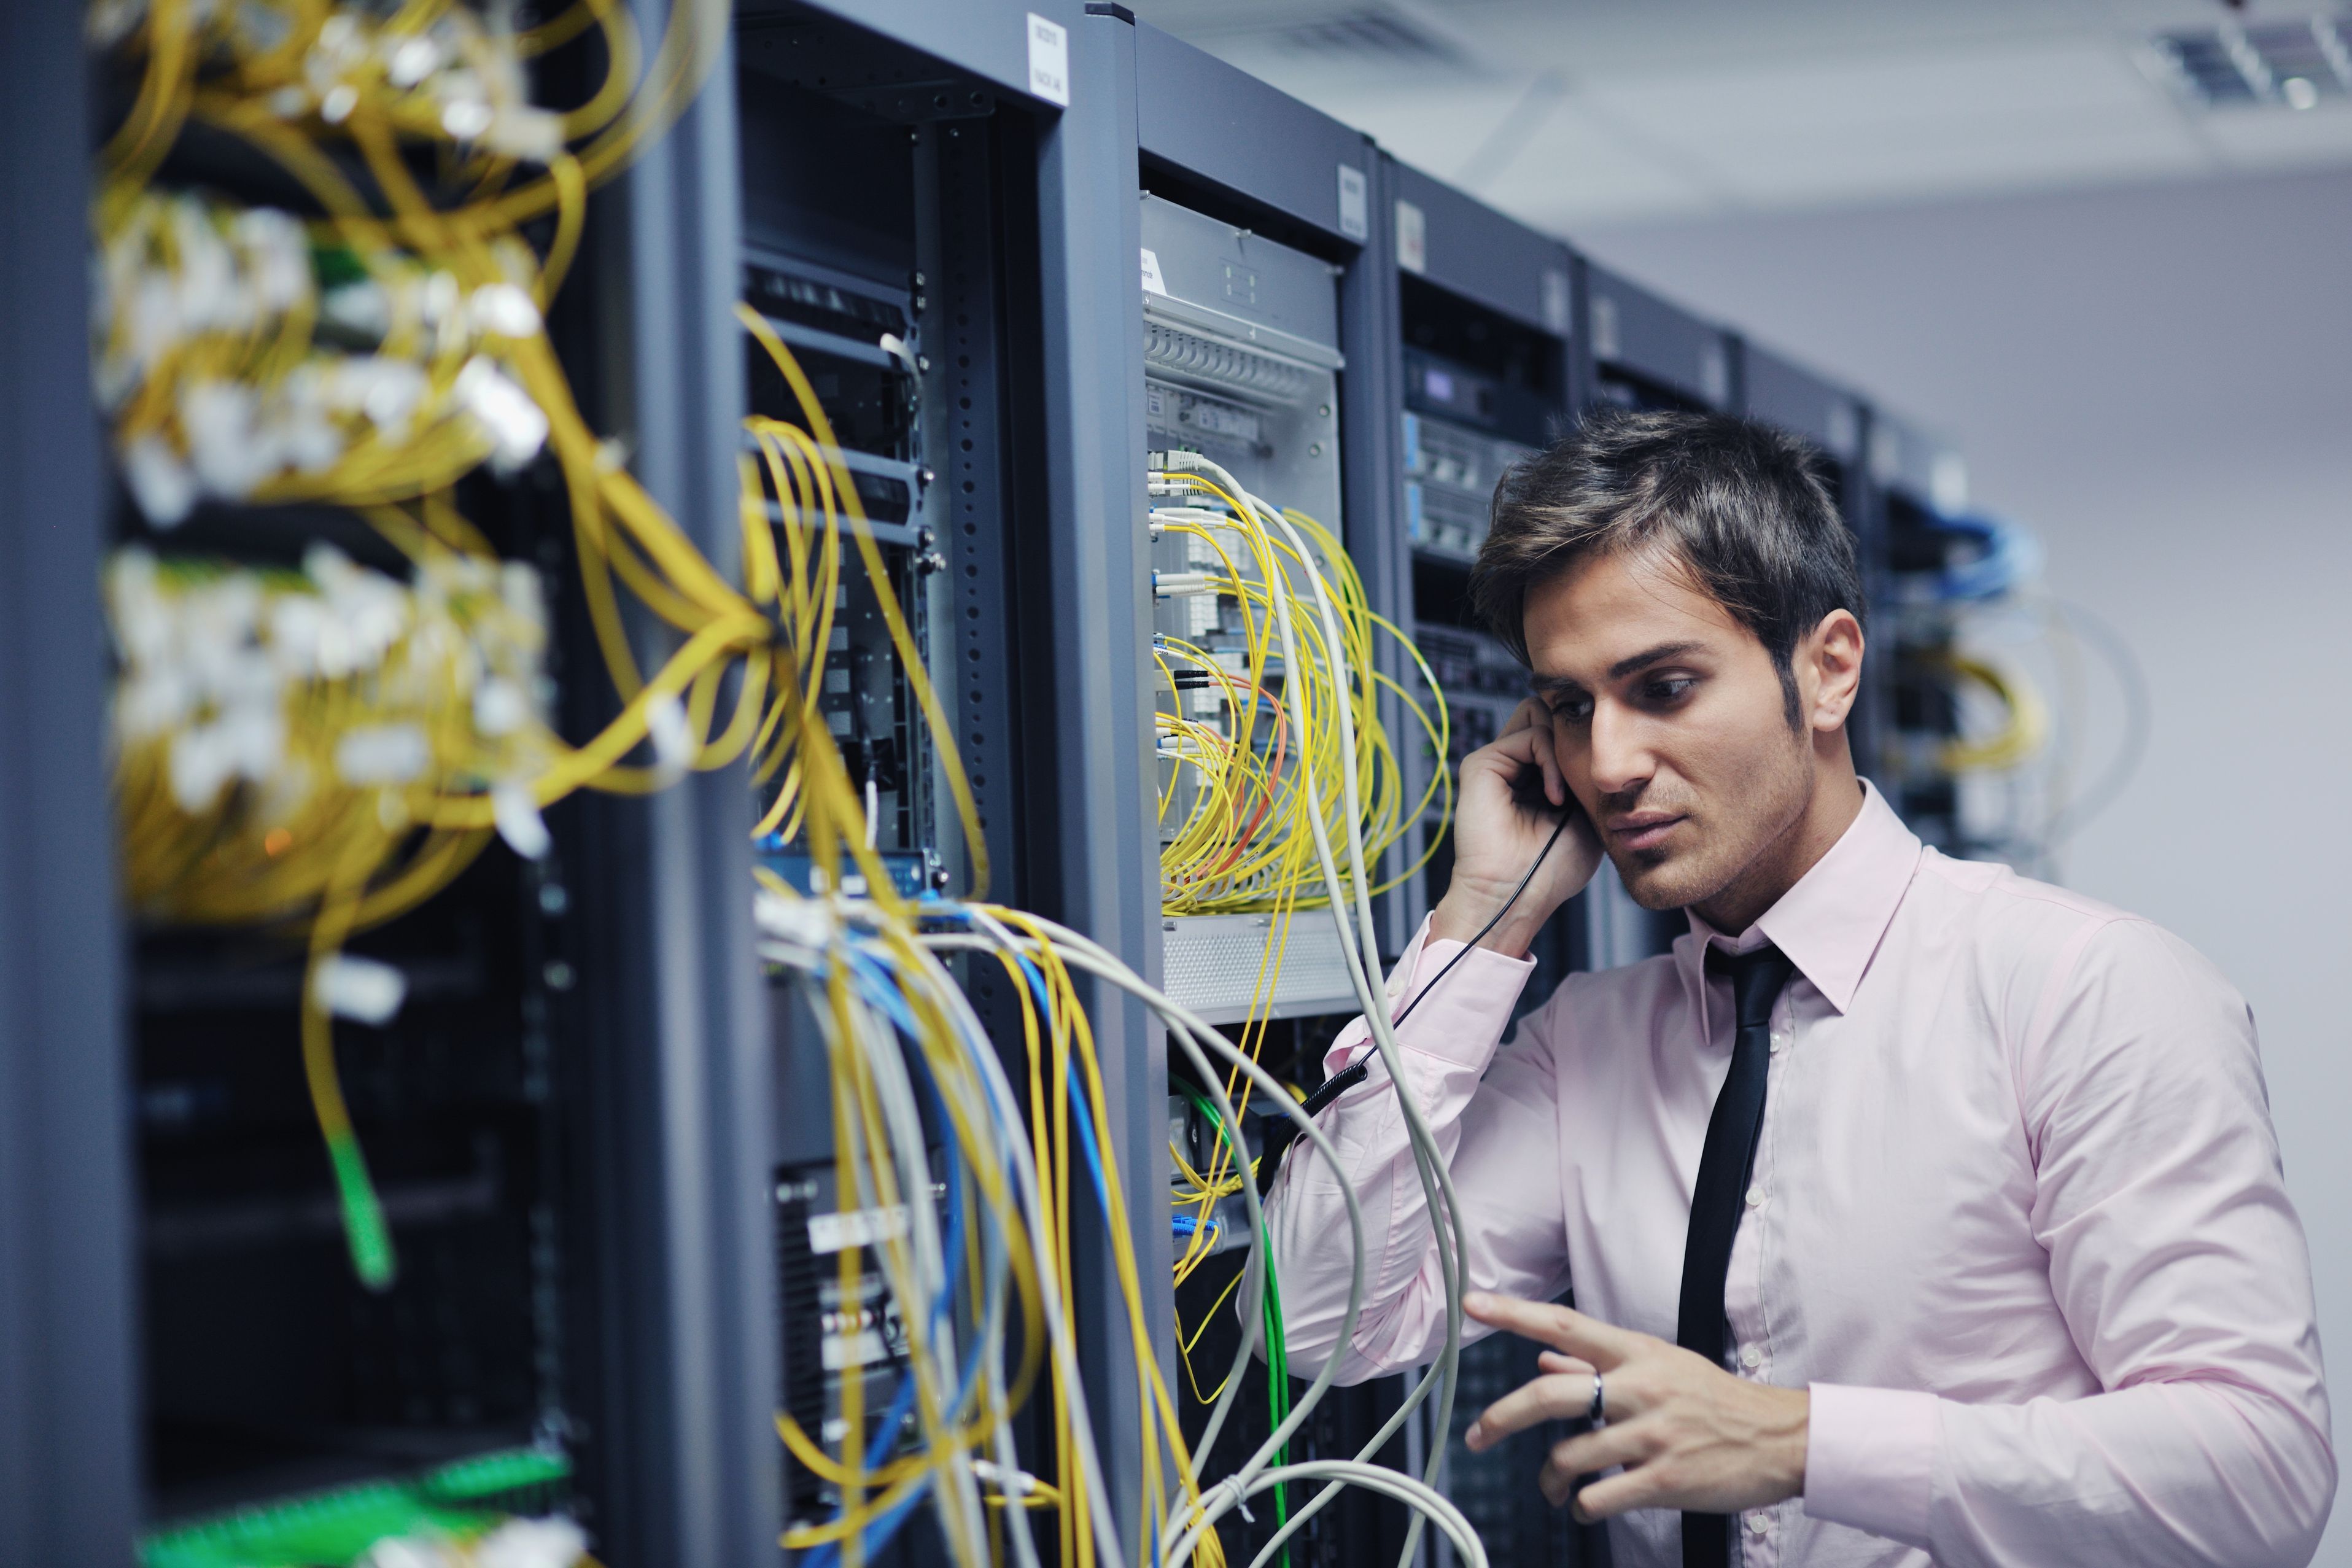 Business Cabling Service in Harrisburg, PA: Why a Professional Service Is Worth the Investment